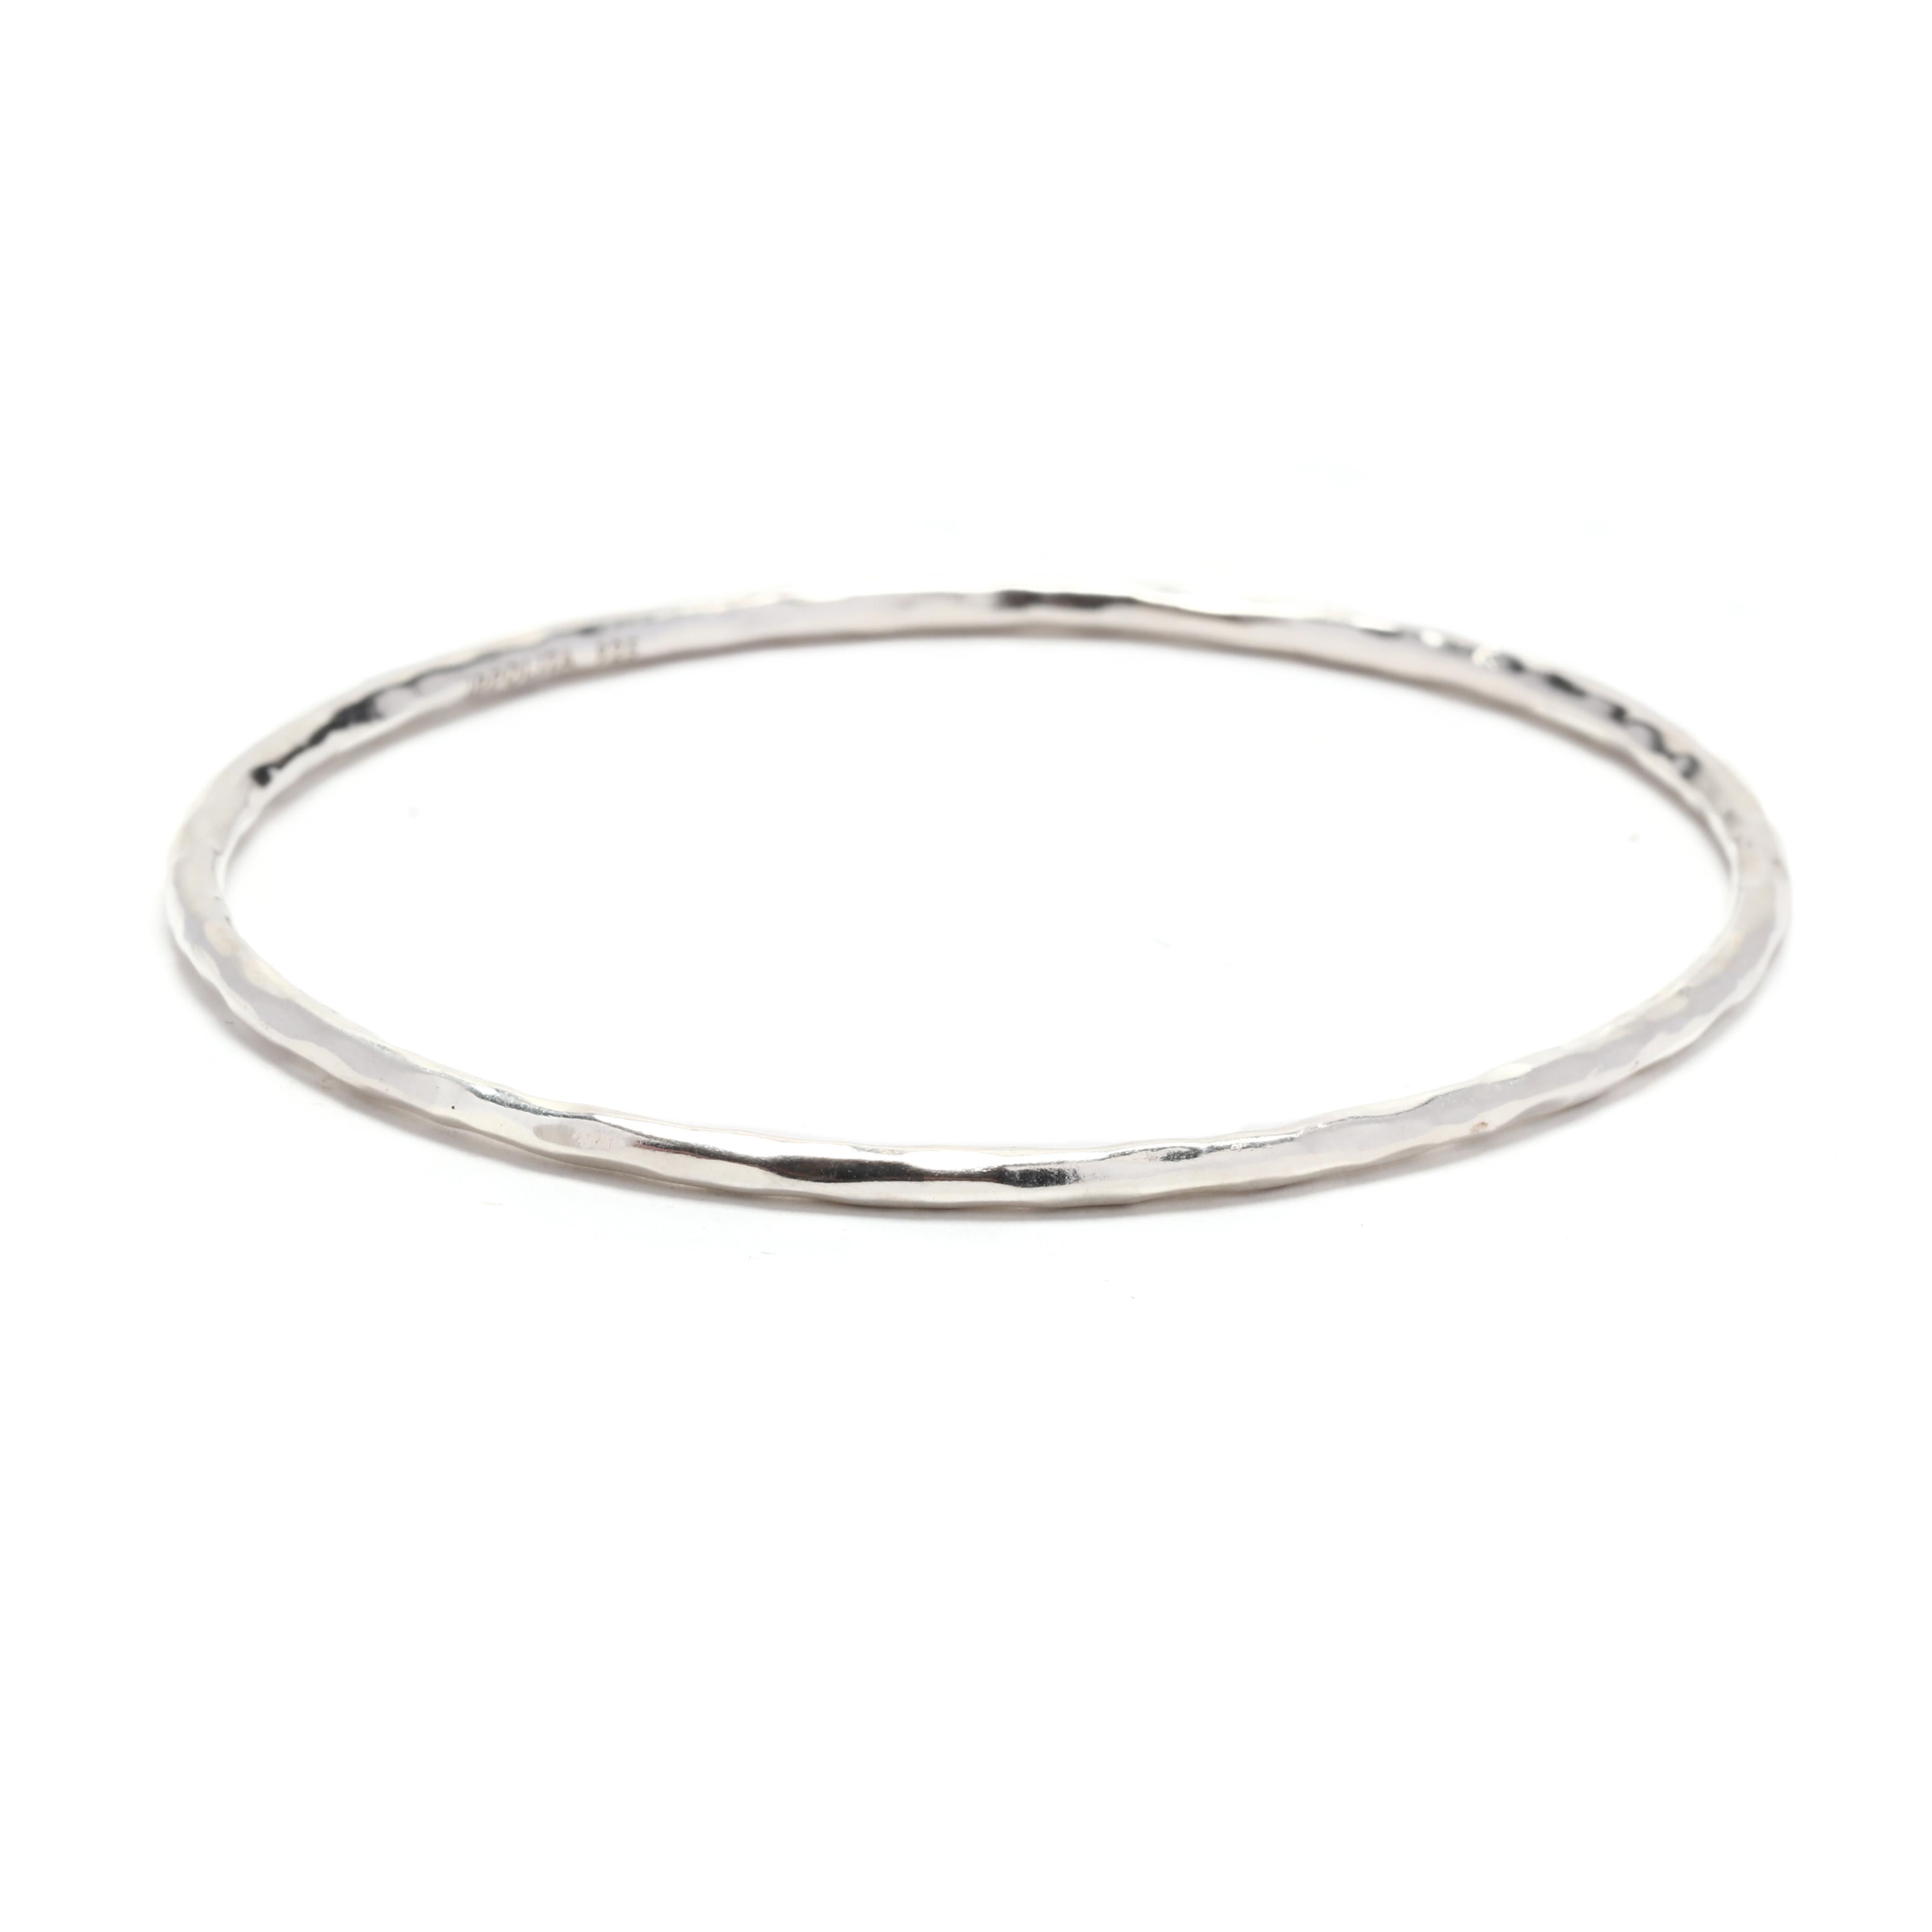 Adorn your wrist with this stunning Ippolita bangle bracelet. Made from high-quality sterling silver, this bracelet showcases a sleek and modern design that is perfect for everyday wear. The bracelet measures 7.75 inches in length, making it a